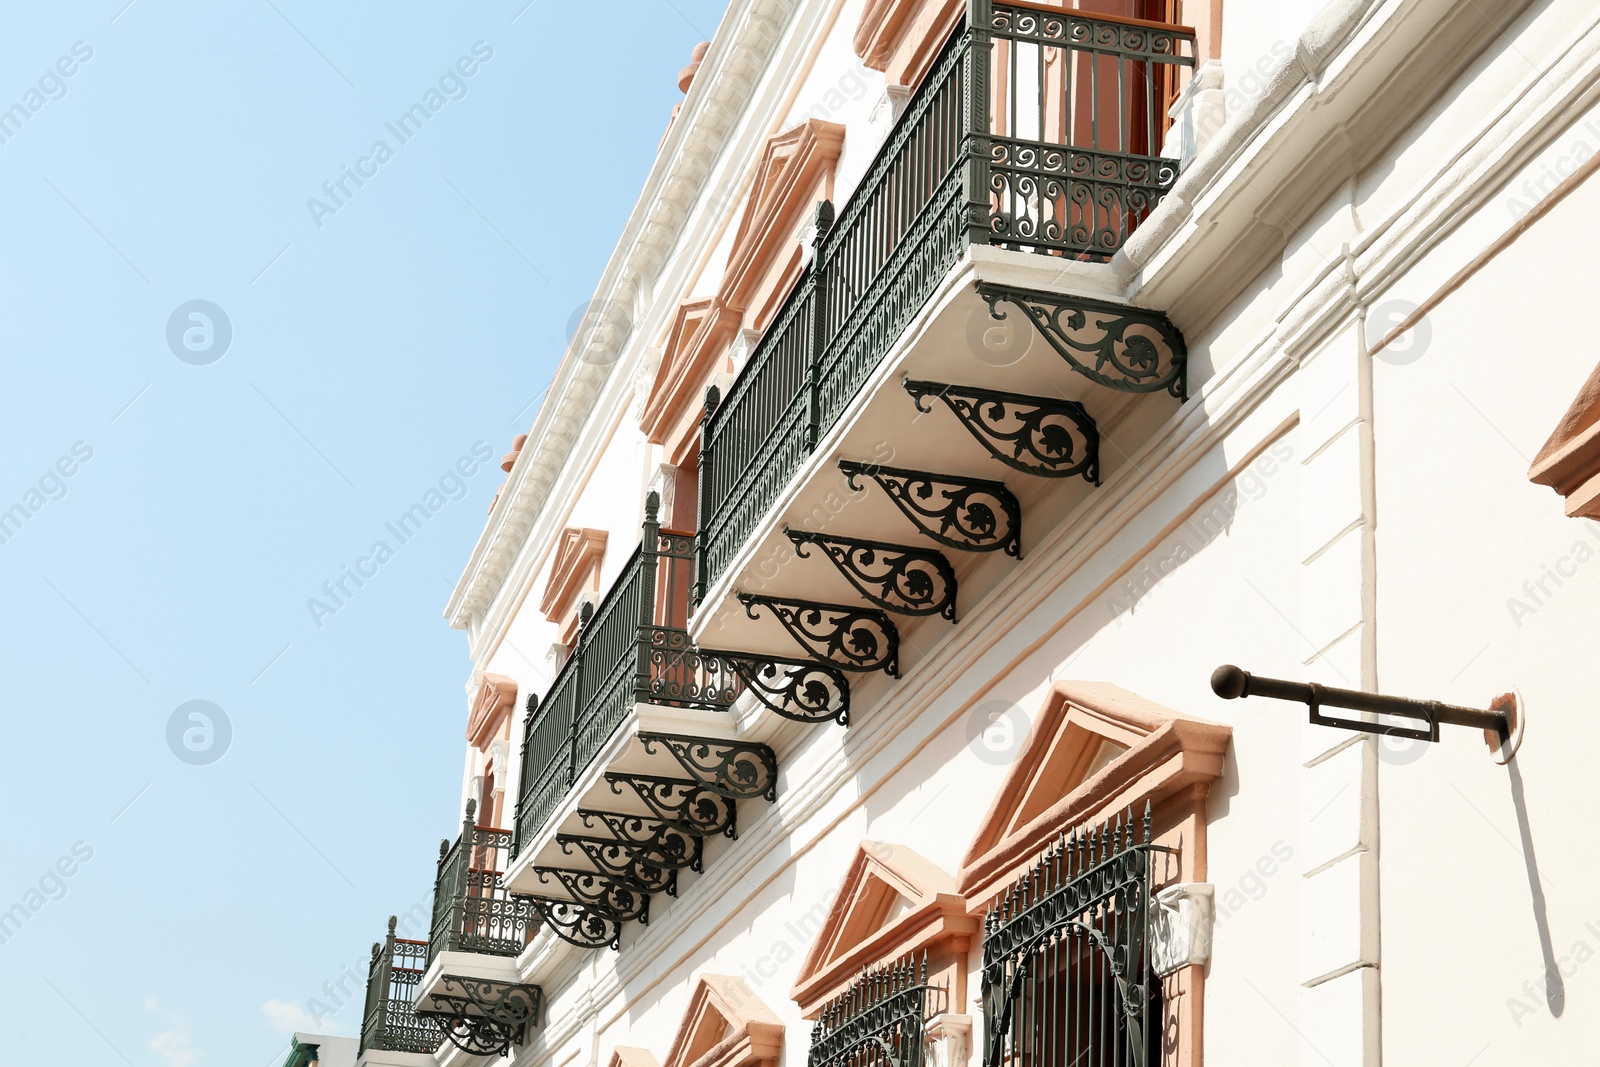 Photo of Exterior of beautiful building with windows and balconies